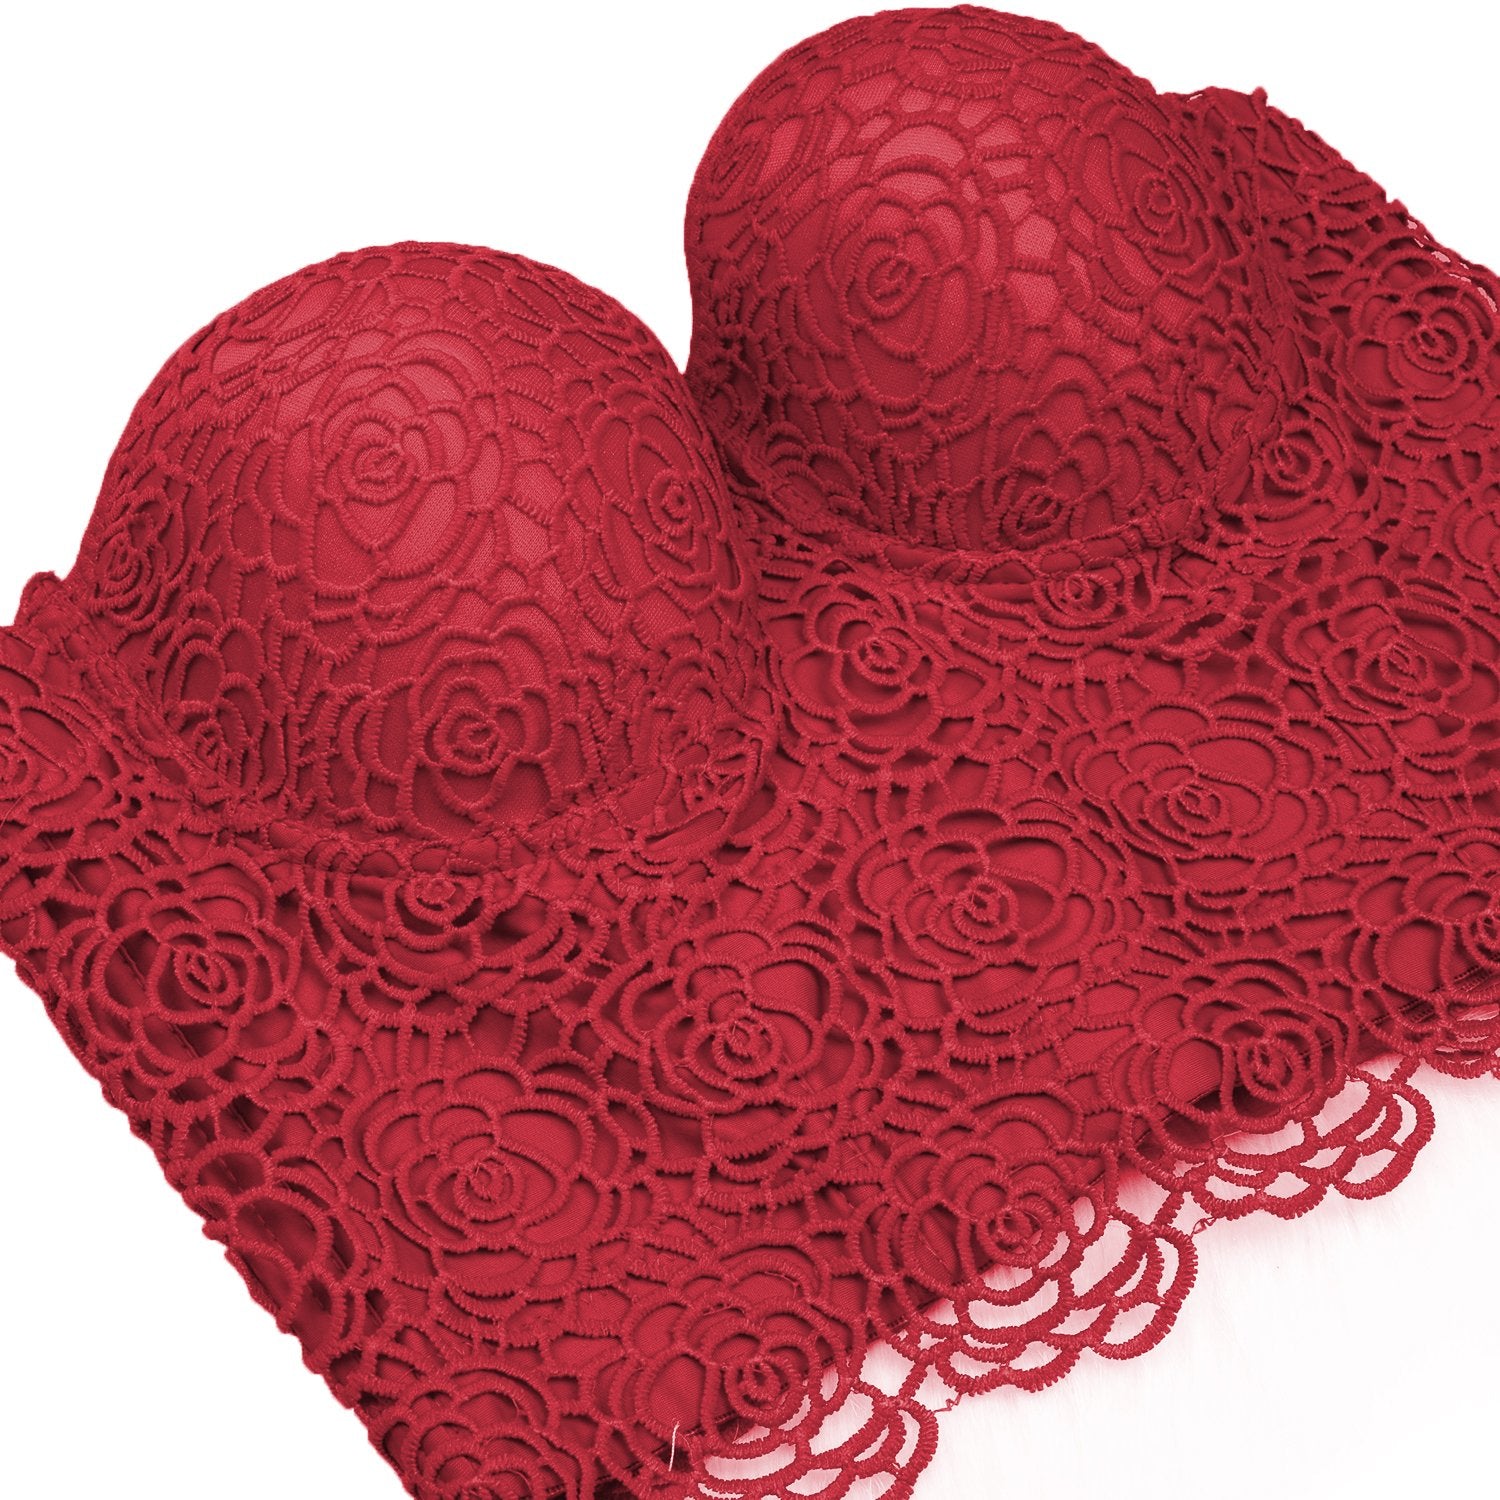 Heart Patterned Lace Bustier Top - Red